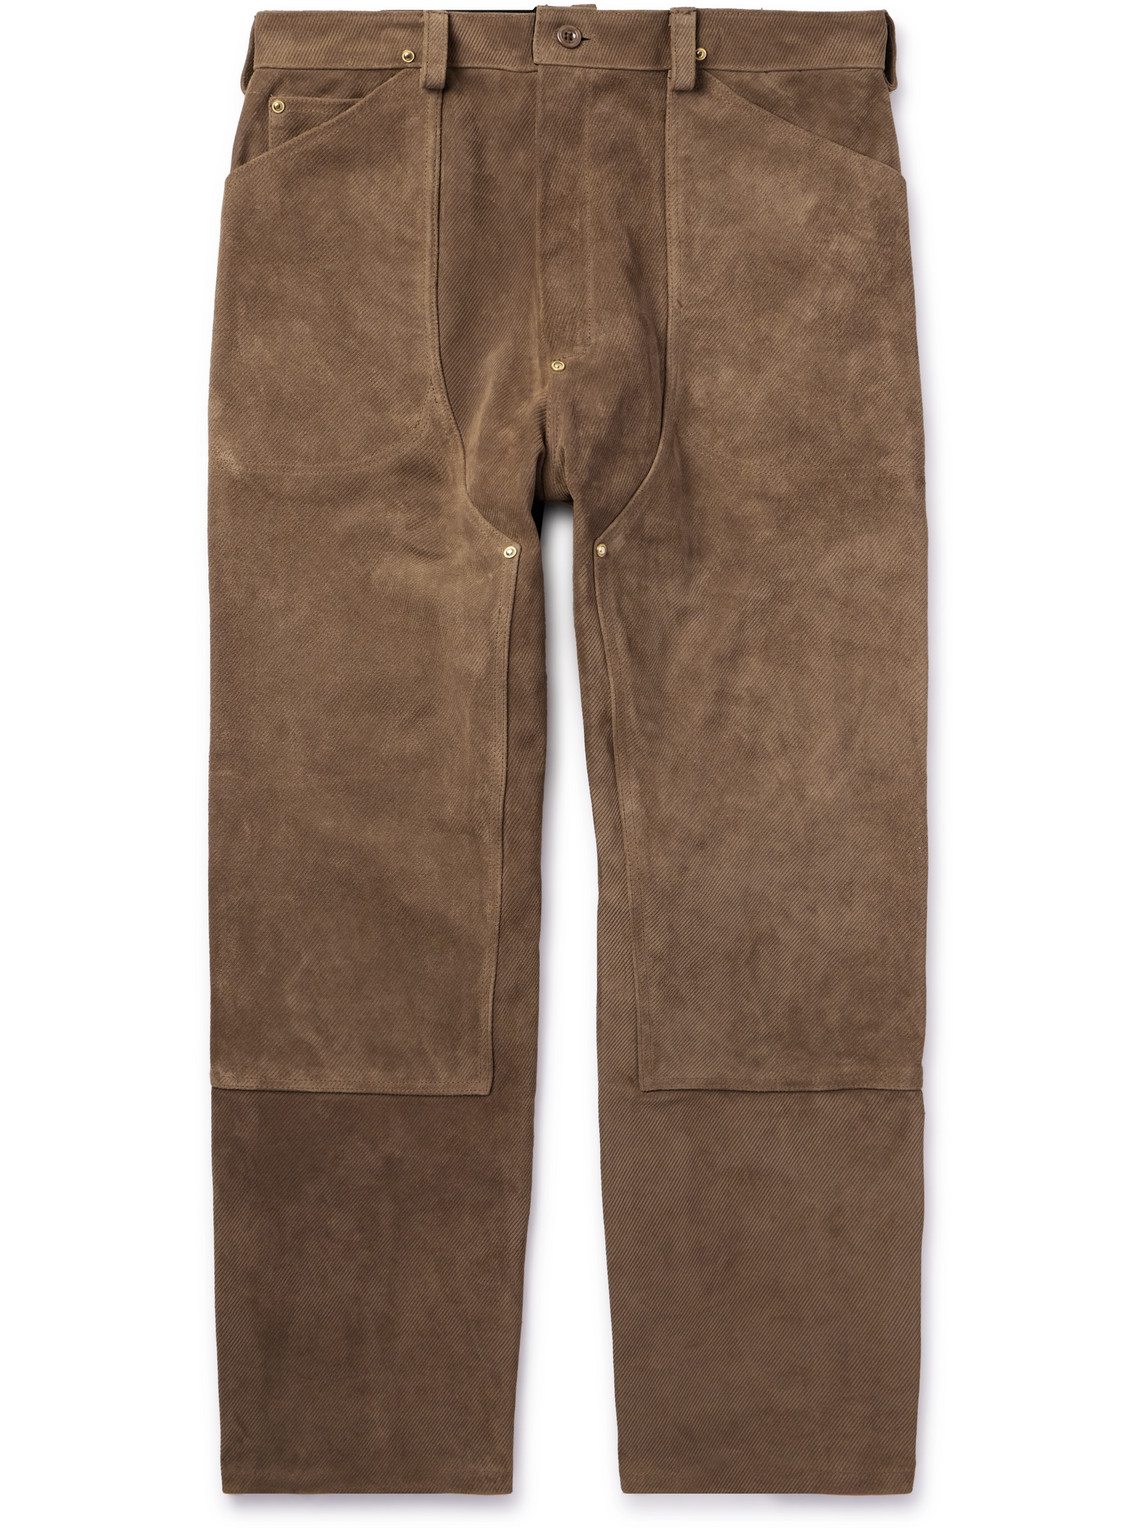 Throwing Fits Utility Straight-Leg Leather-Corduroy Trousers